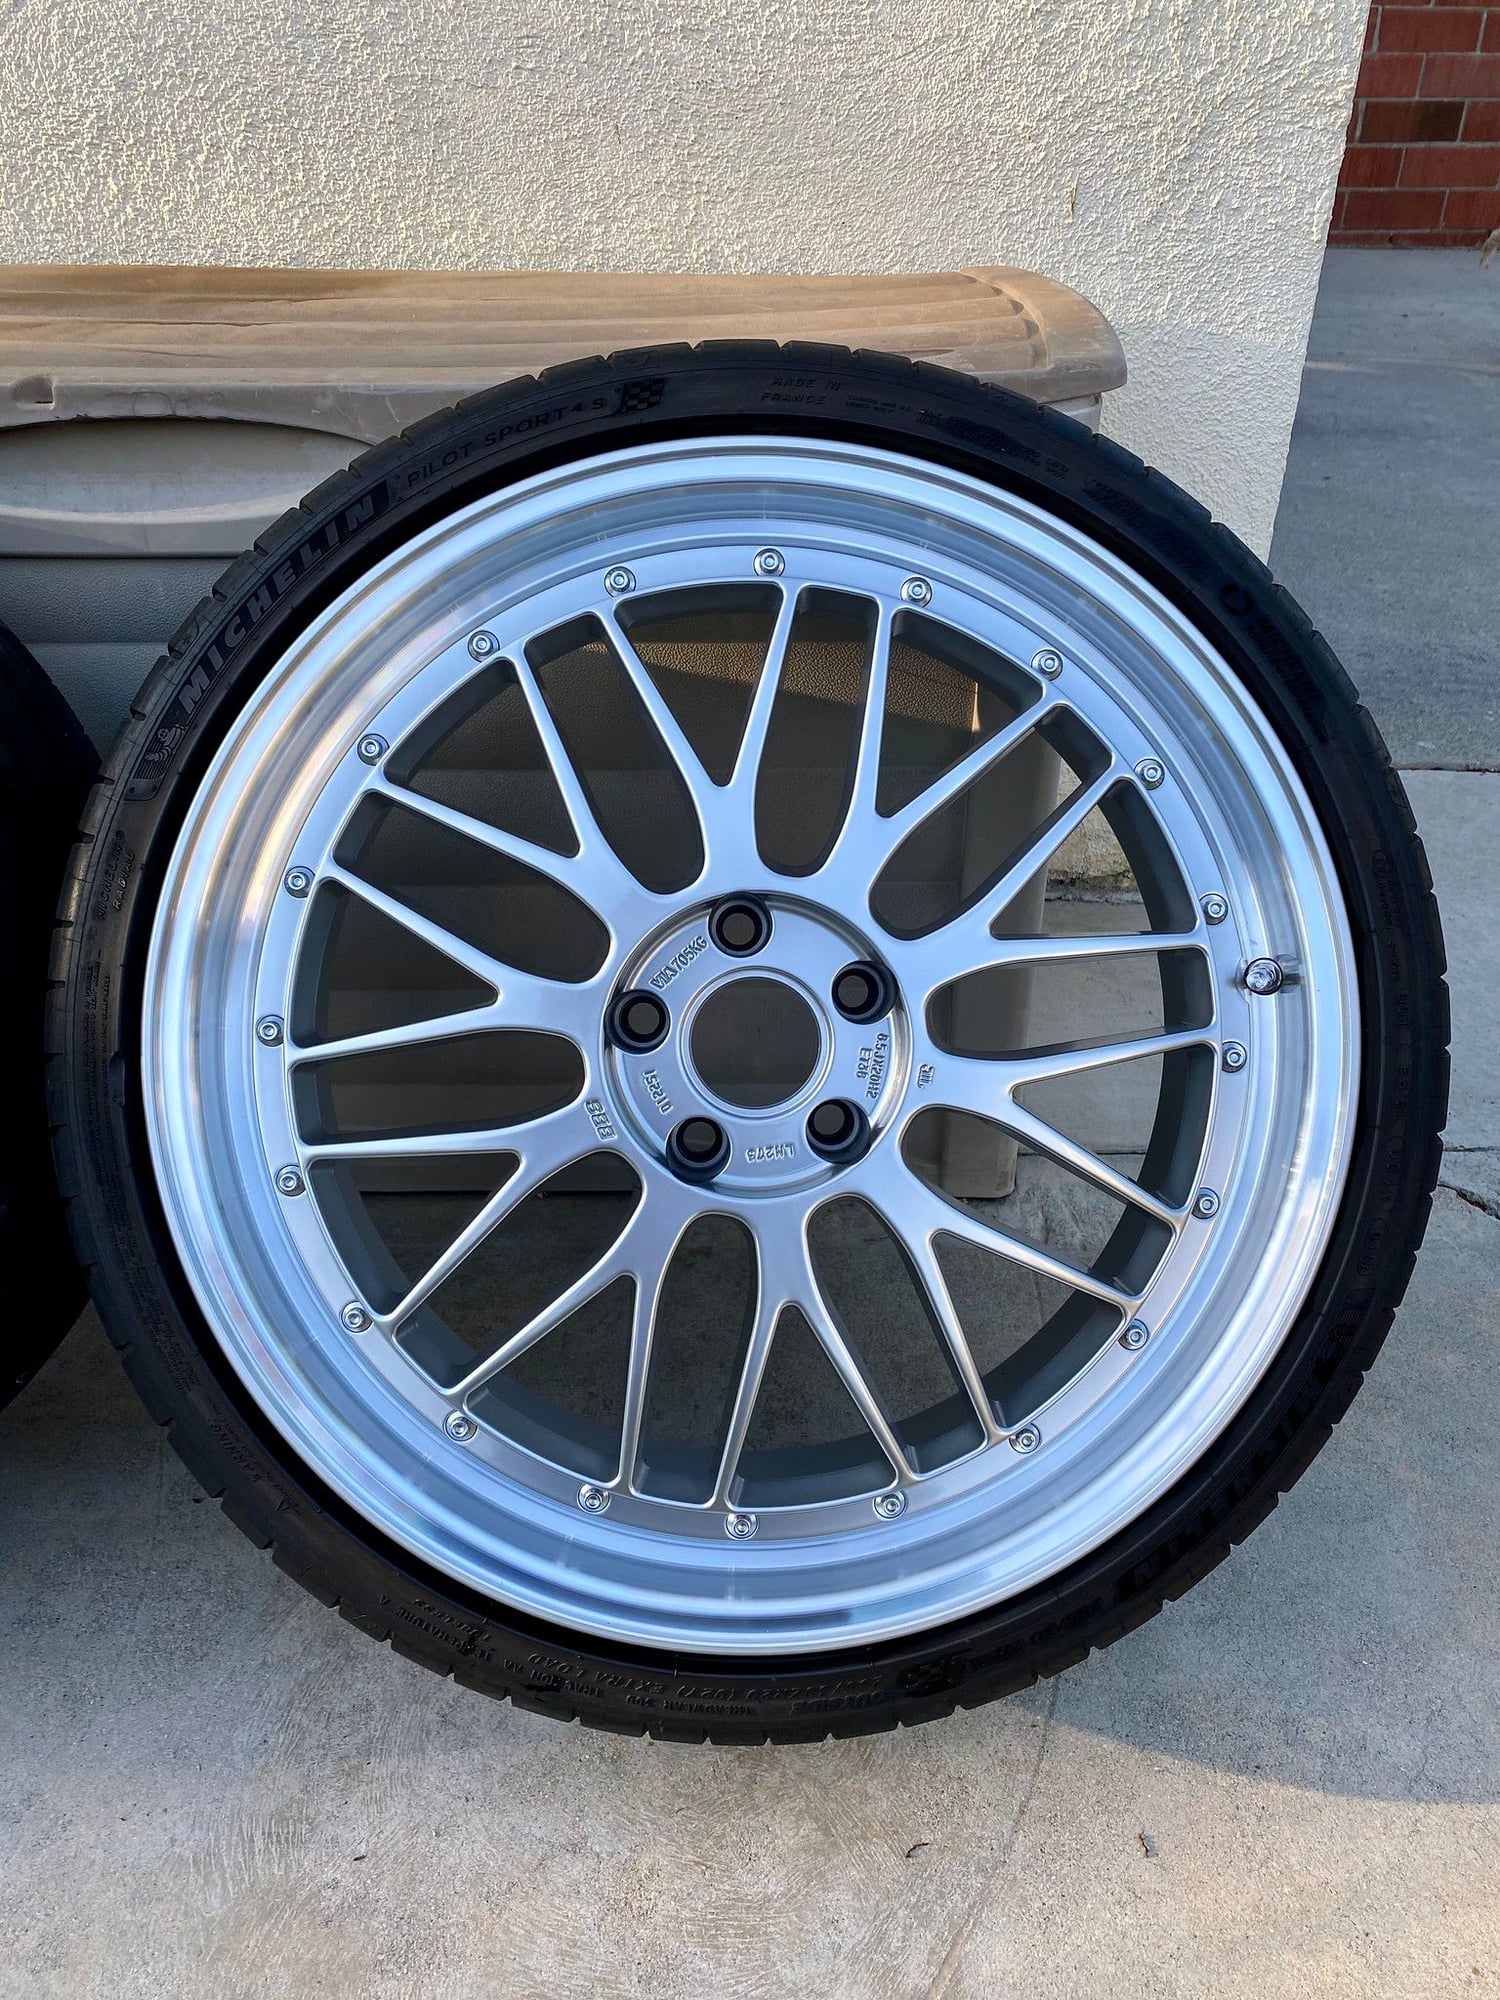 2018 Audi S4 - BBS LM 20"x8.5" ET38 5x112 + 255/30/20 Michelin PS4S - Wheels and Tires/Axles - $3,800 - Los Angeles, CA 90066, United States